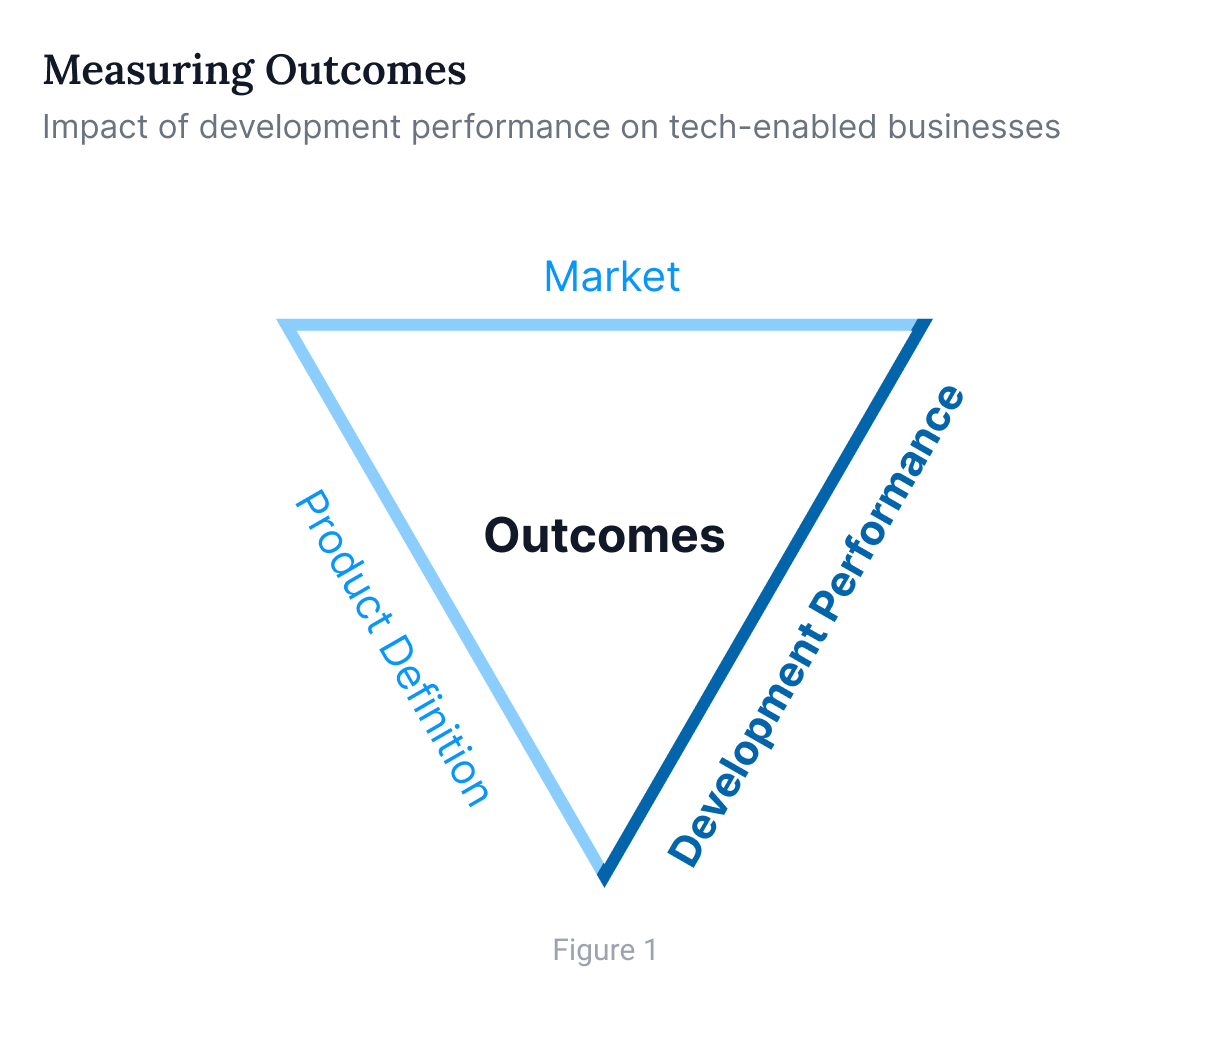 Business outcomes and development performance